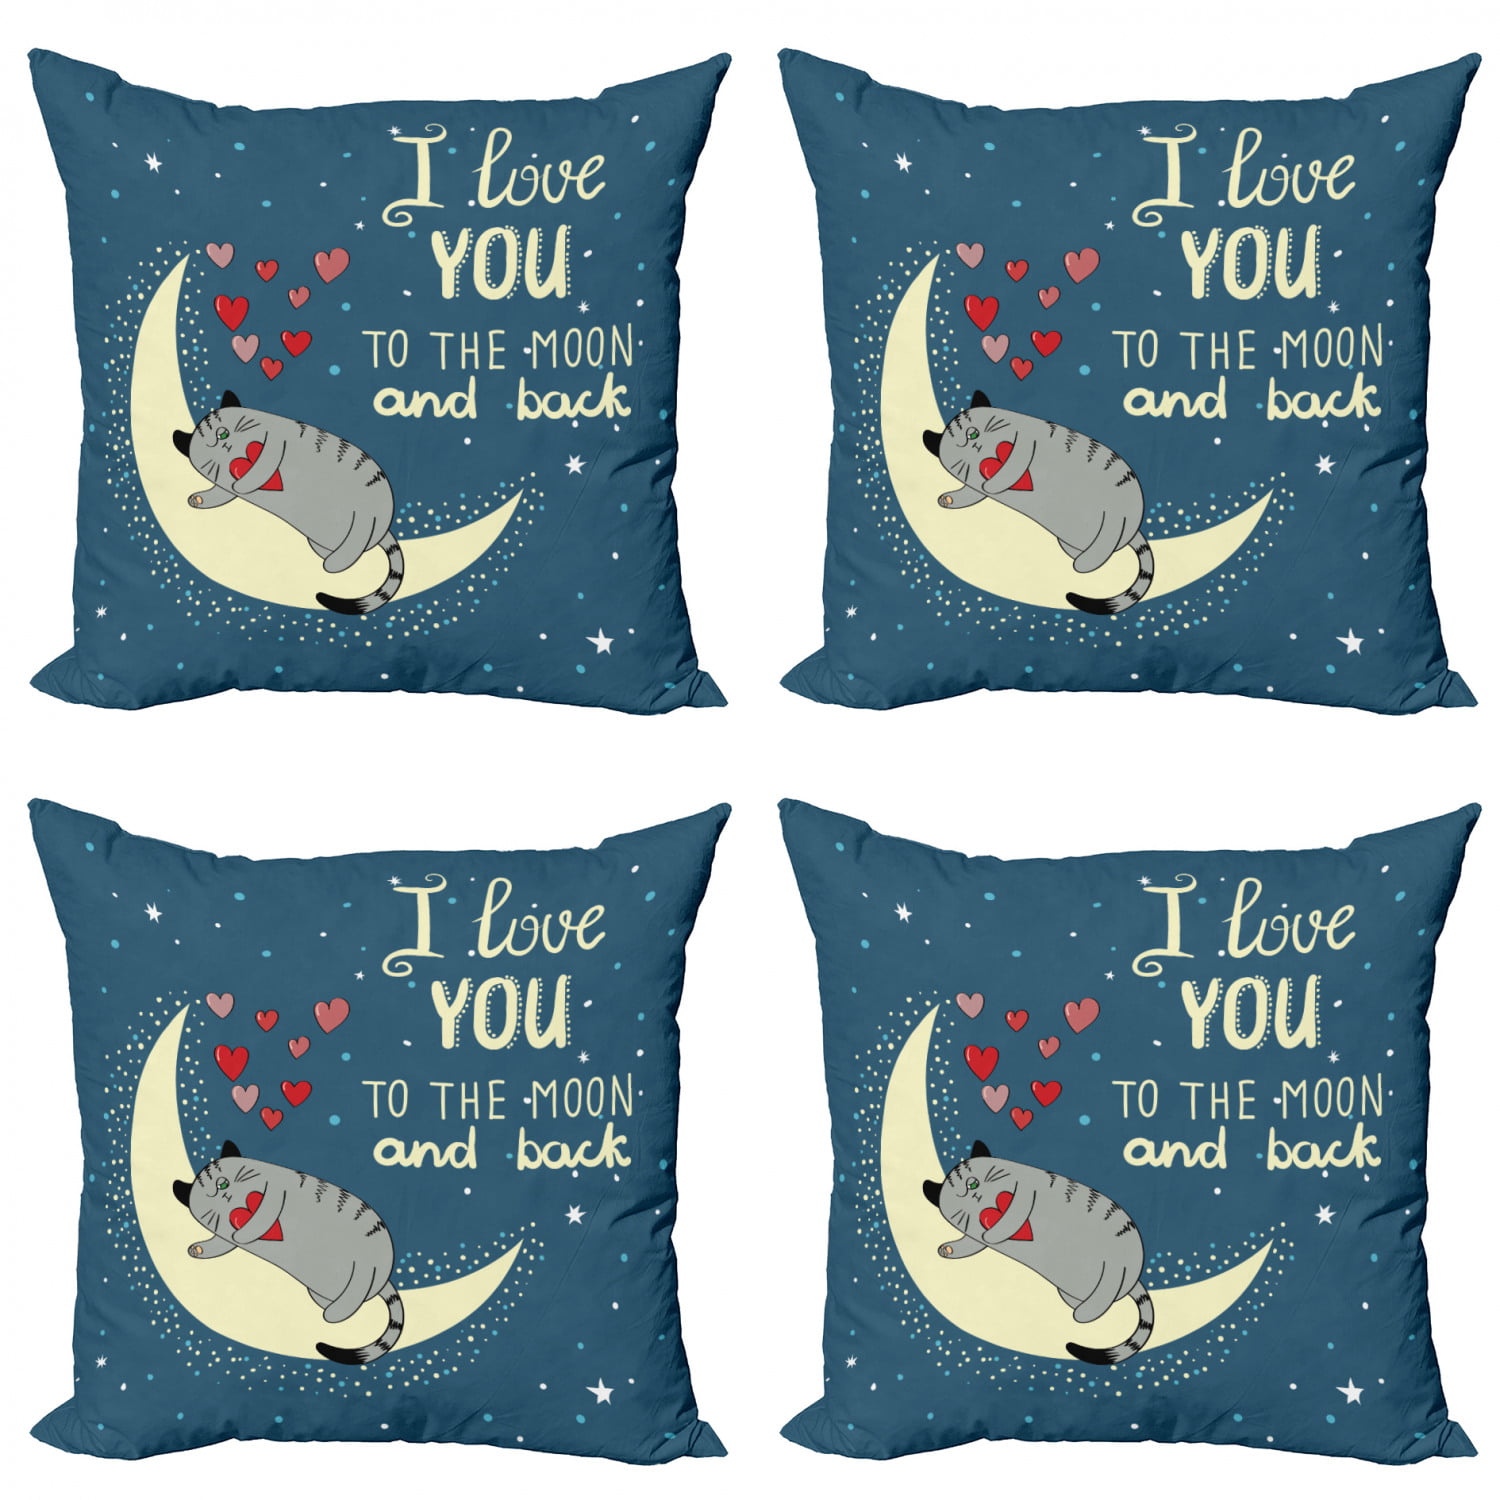 Decorative Square Accent Pillow Case Ambesonne I Love You Throw Pillow Cushion Cover Yellow Blue 16 X 16 Sleepy Cat Holding Hearts Over The Moon at Night Sky